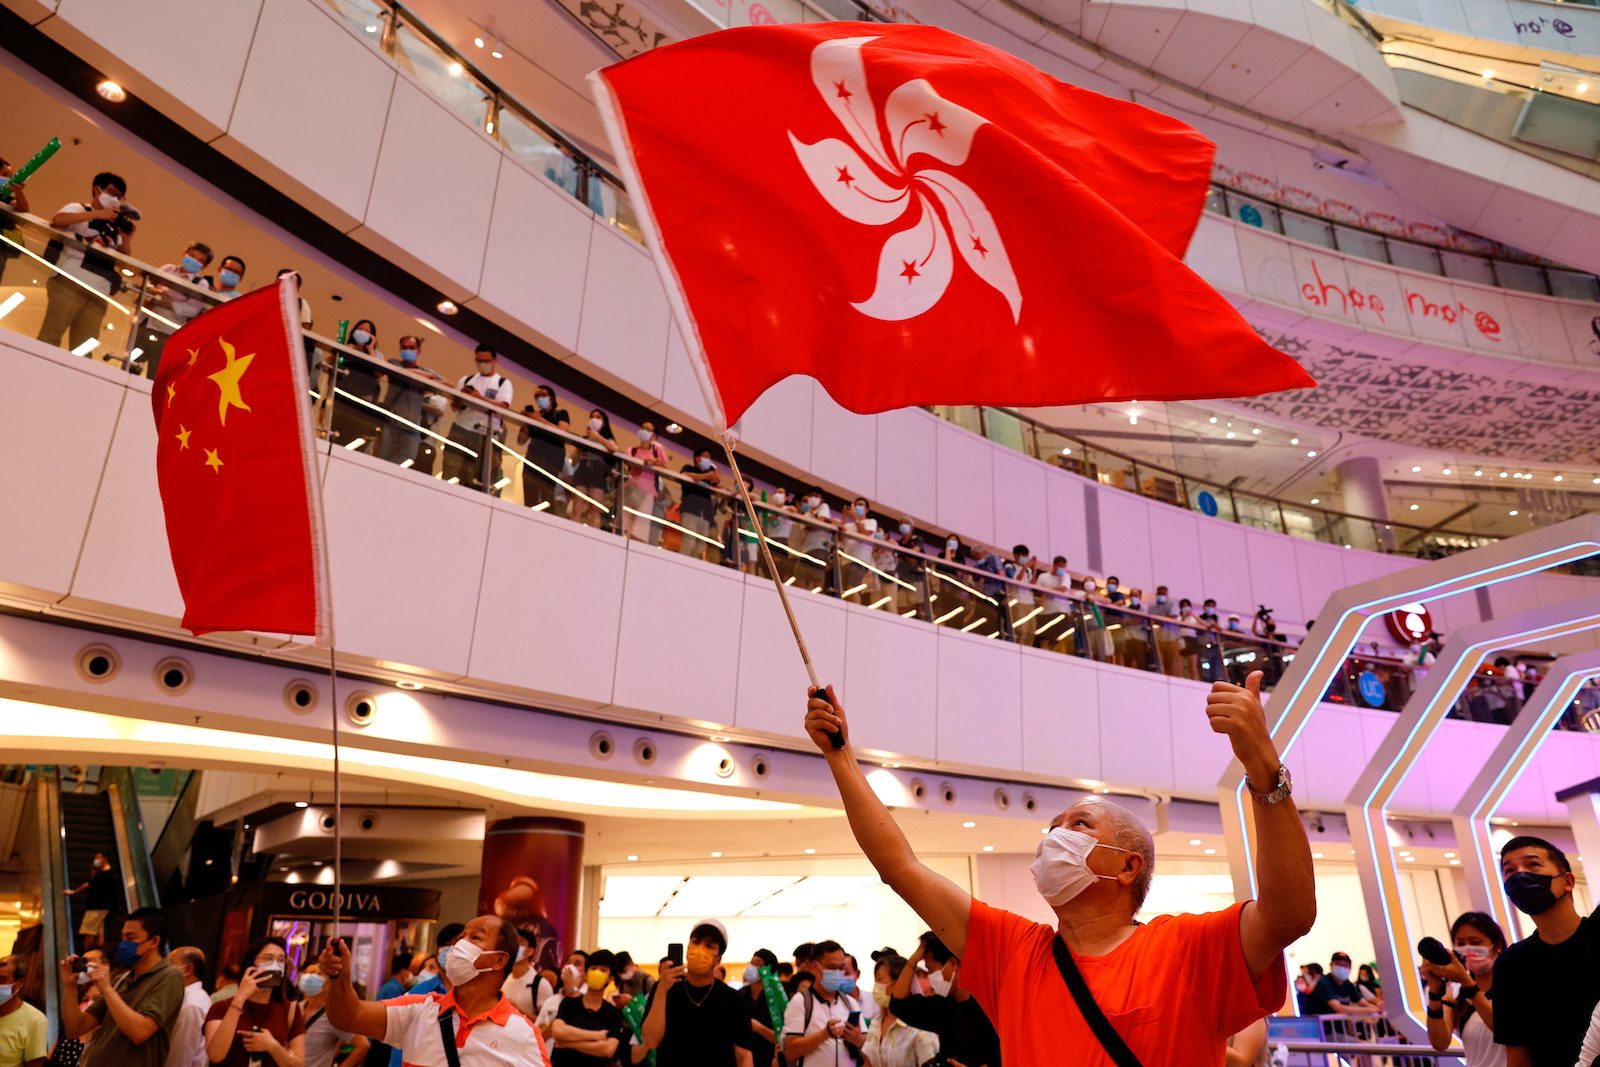 Hong Kong police arrest man for booing China anthem during Olympics broadcast